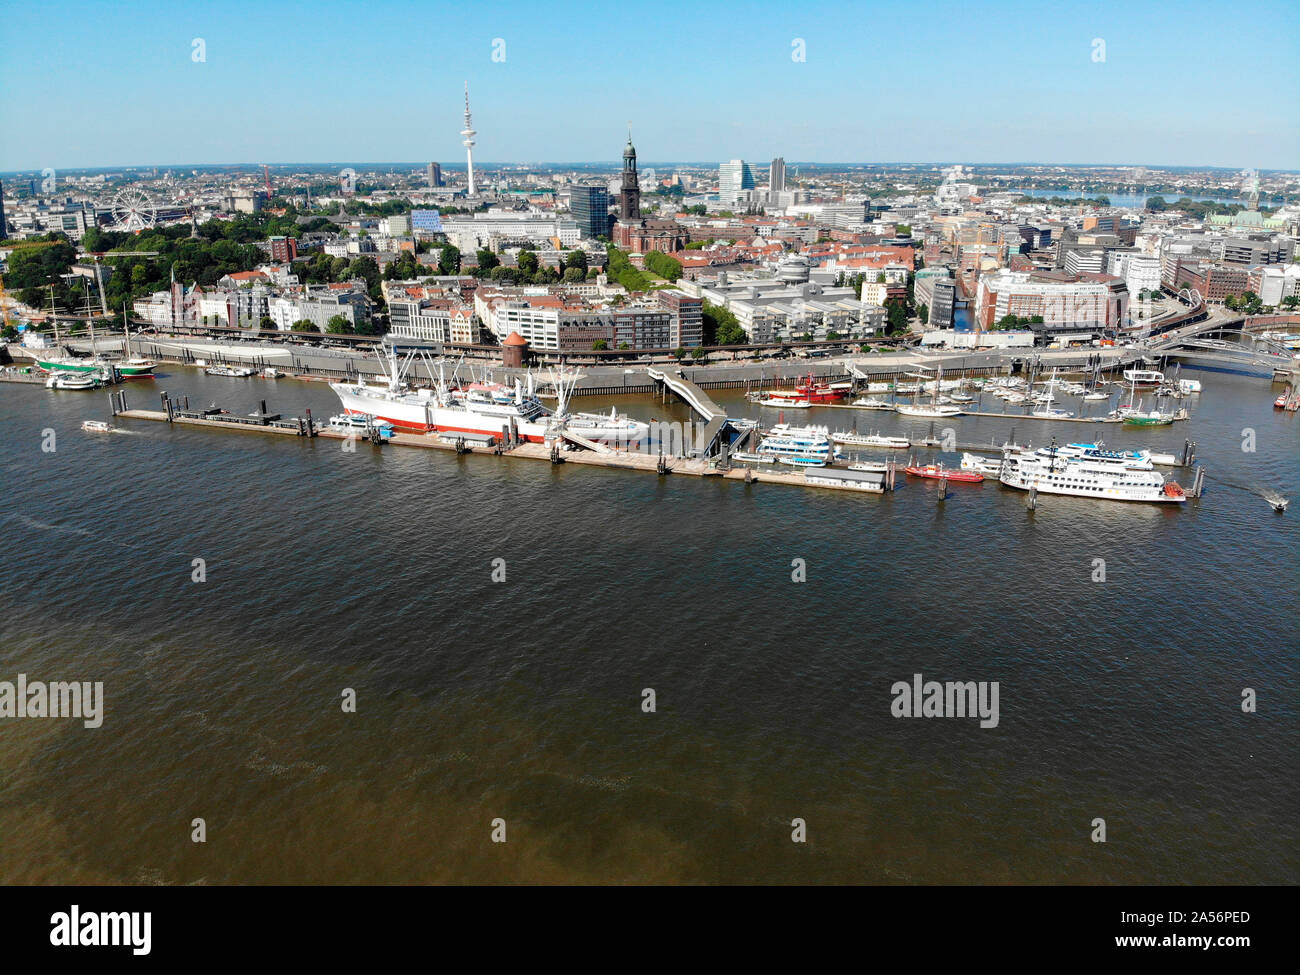 Sankt Pauli Hafen High Resolution Stock Photography and Images - Alamy